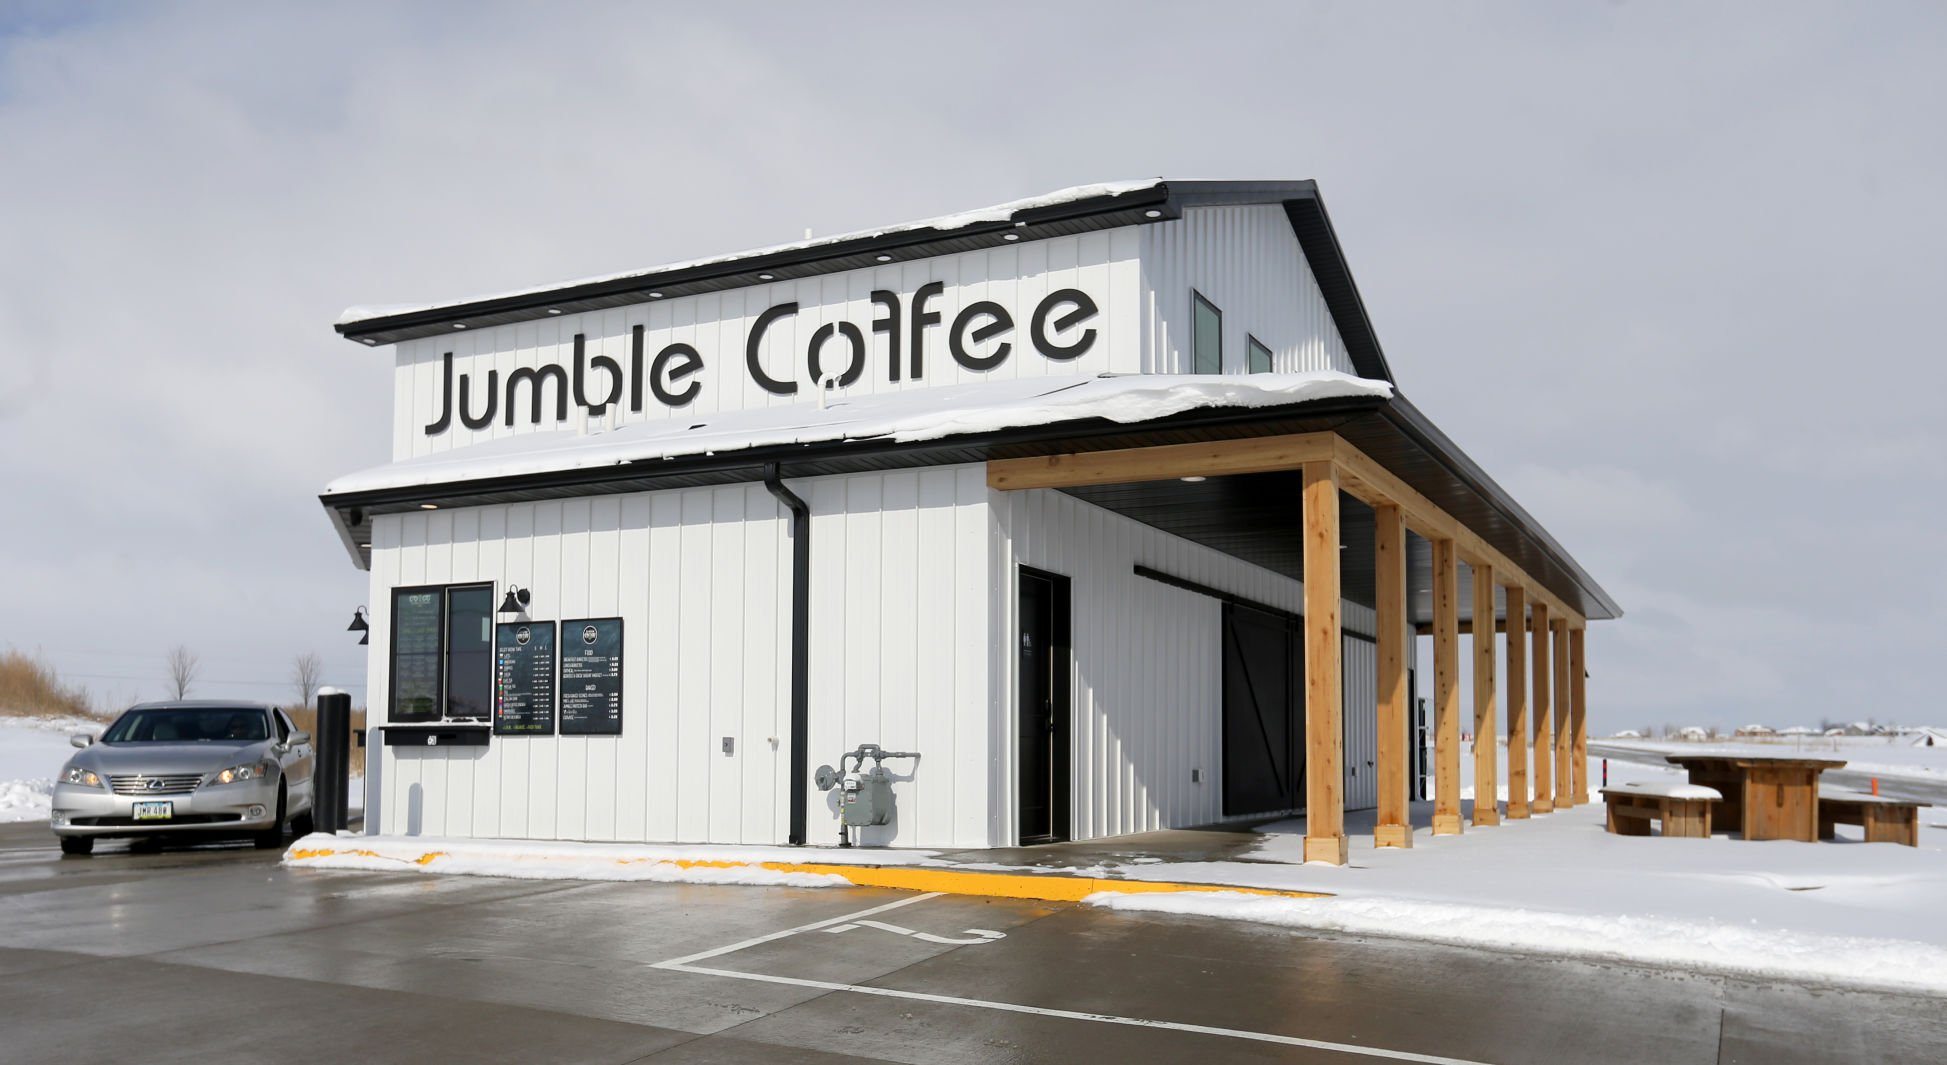 Jumble Coffee Co. in Peosta, Iowa, opened on Monday on Thunder Valley Drive.    PHOTO CREDIT: JESSICA REILLY